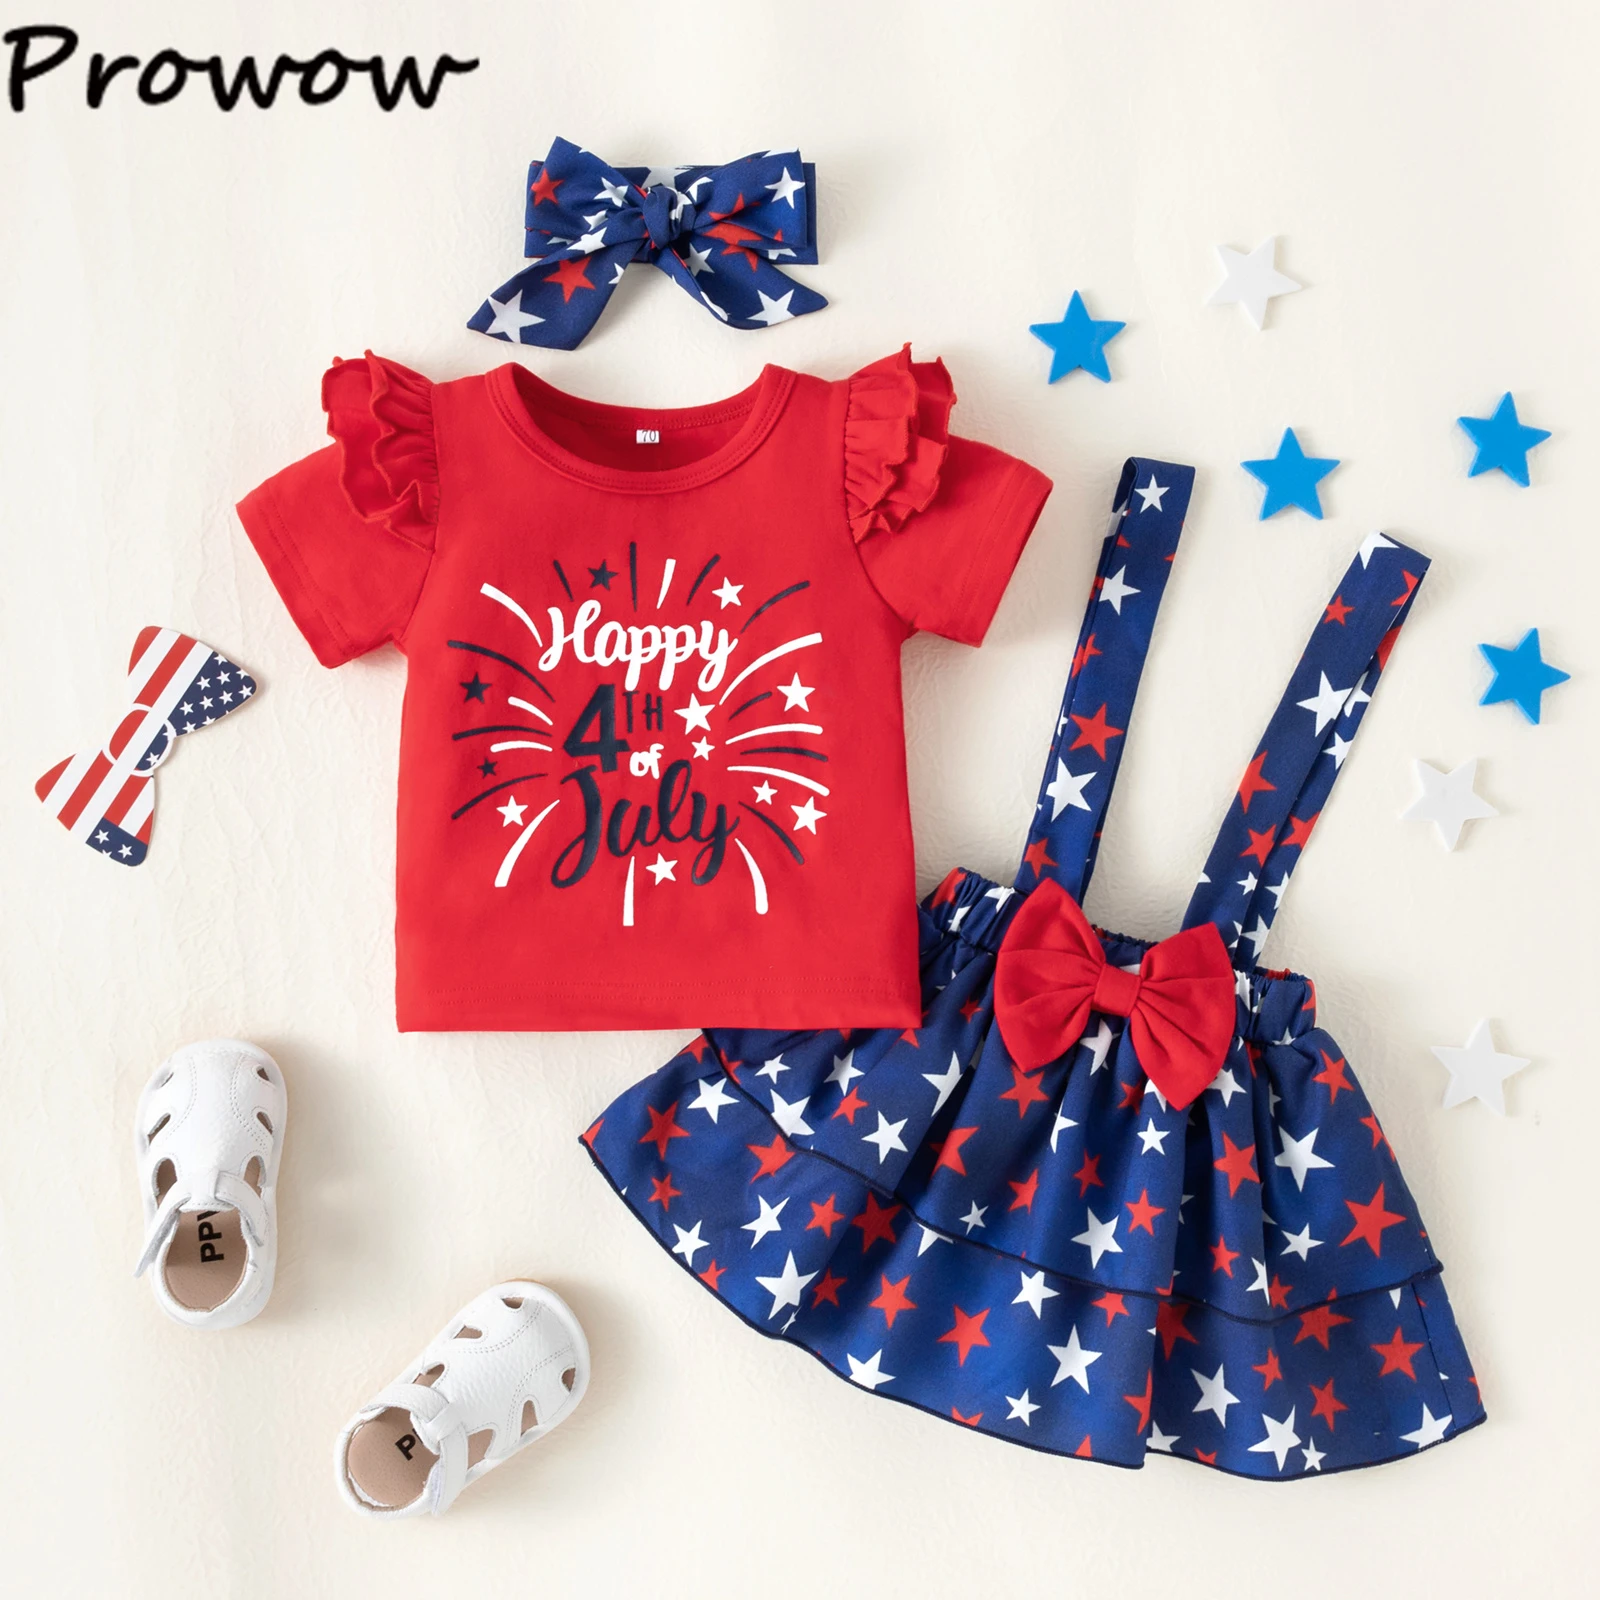 Prowow 0-18M My First 4th Of July Dress Girls Red T-shirts Stars Skirts Suit Independence Day Outfits Baby Dress Set baby floral clothing set